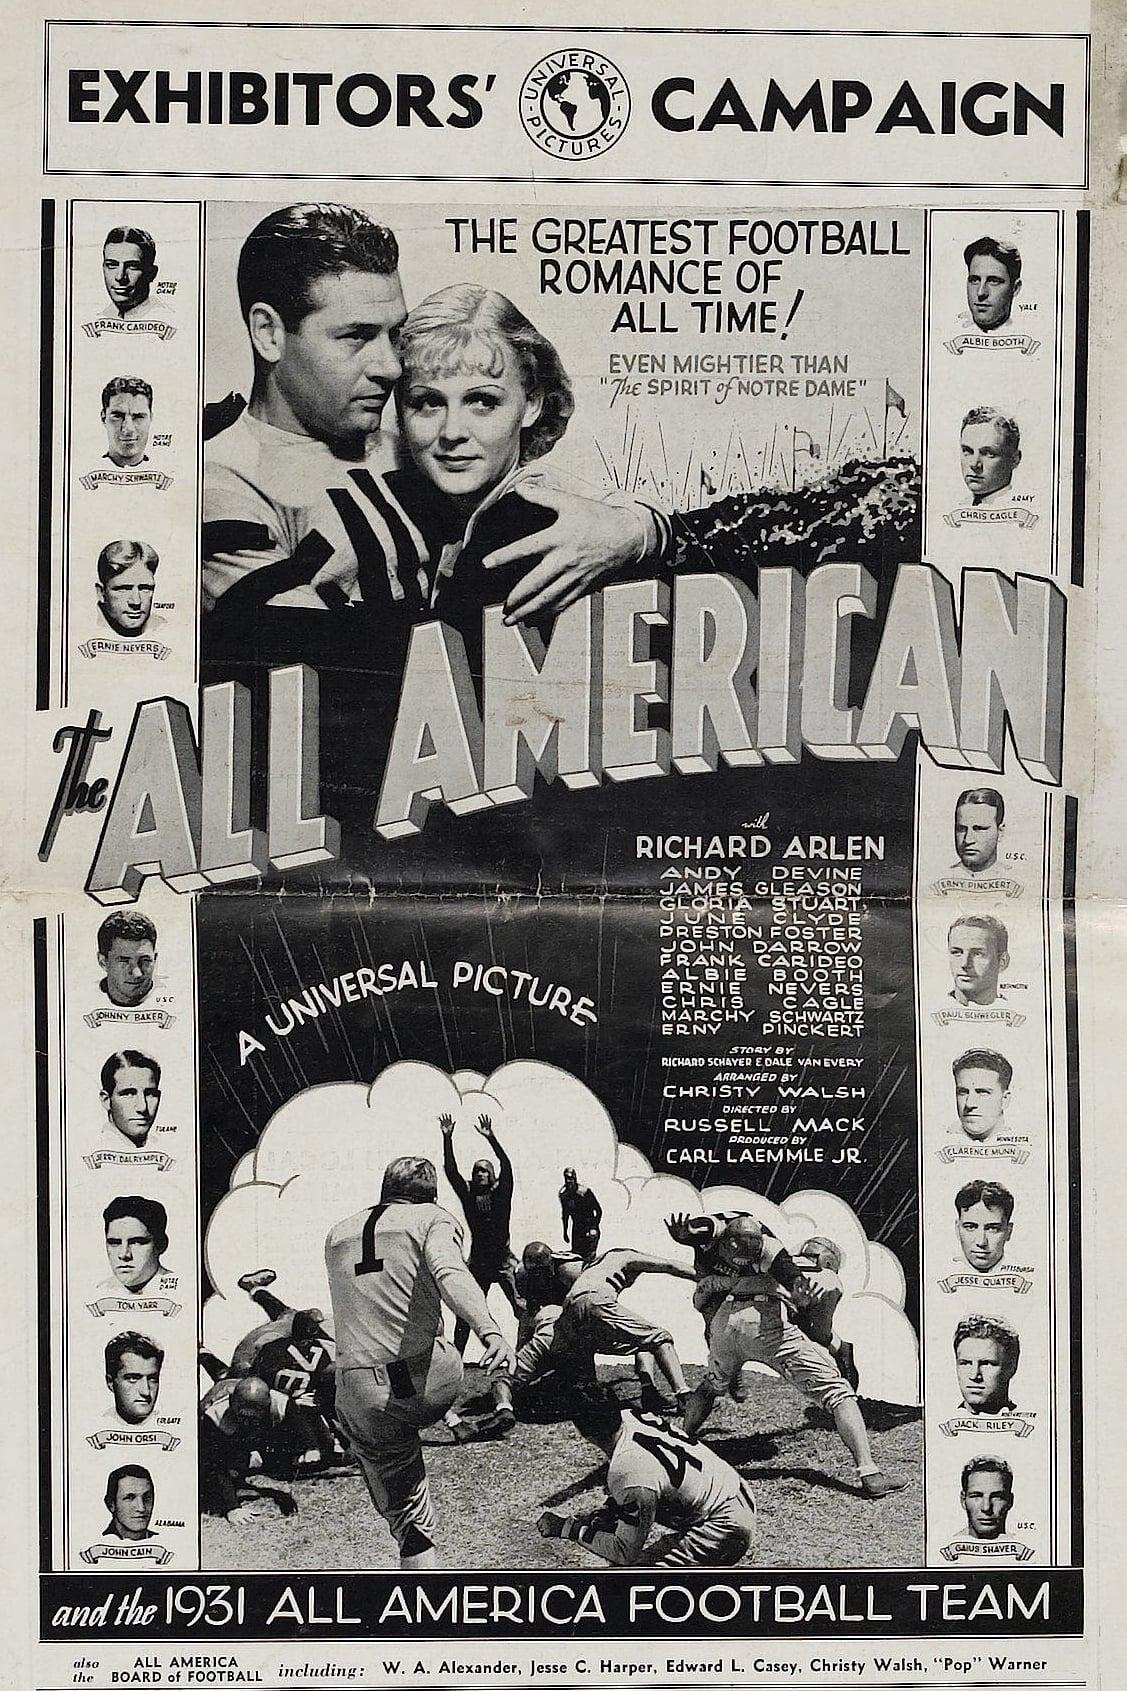 The All-American poster